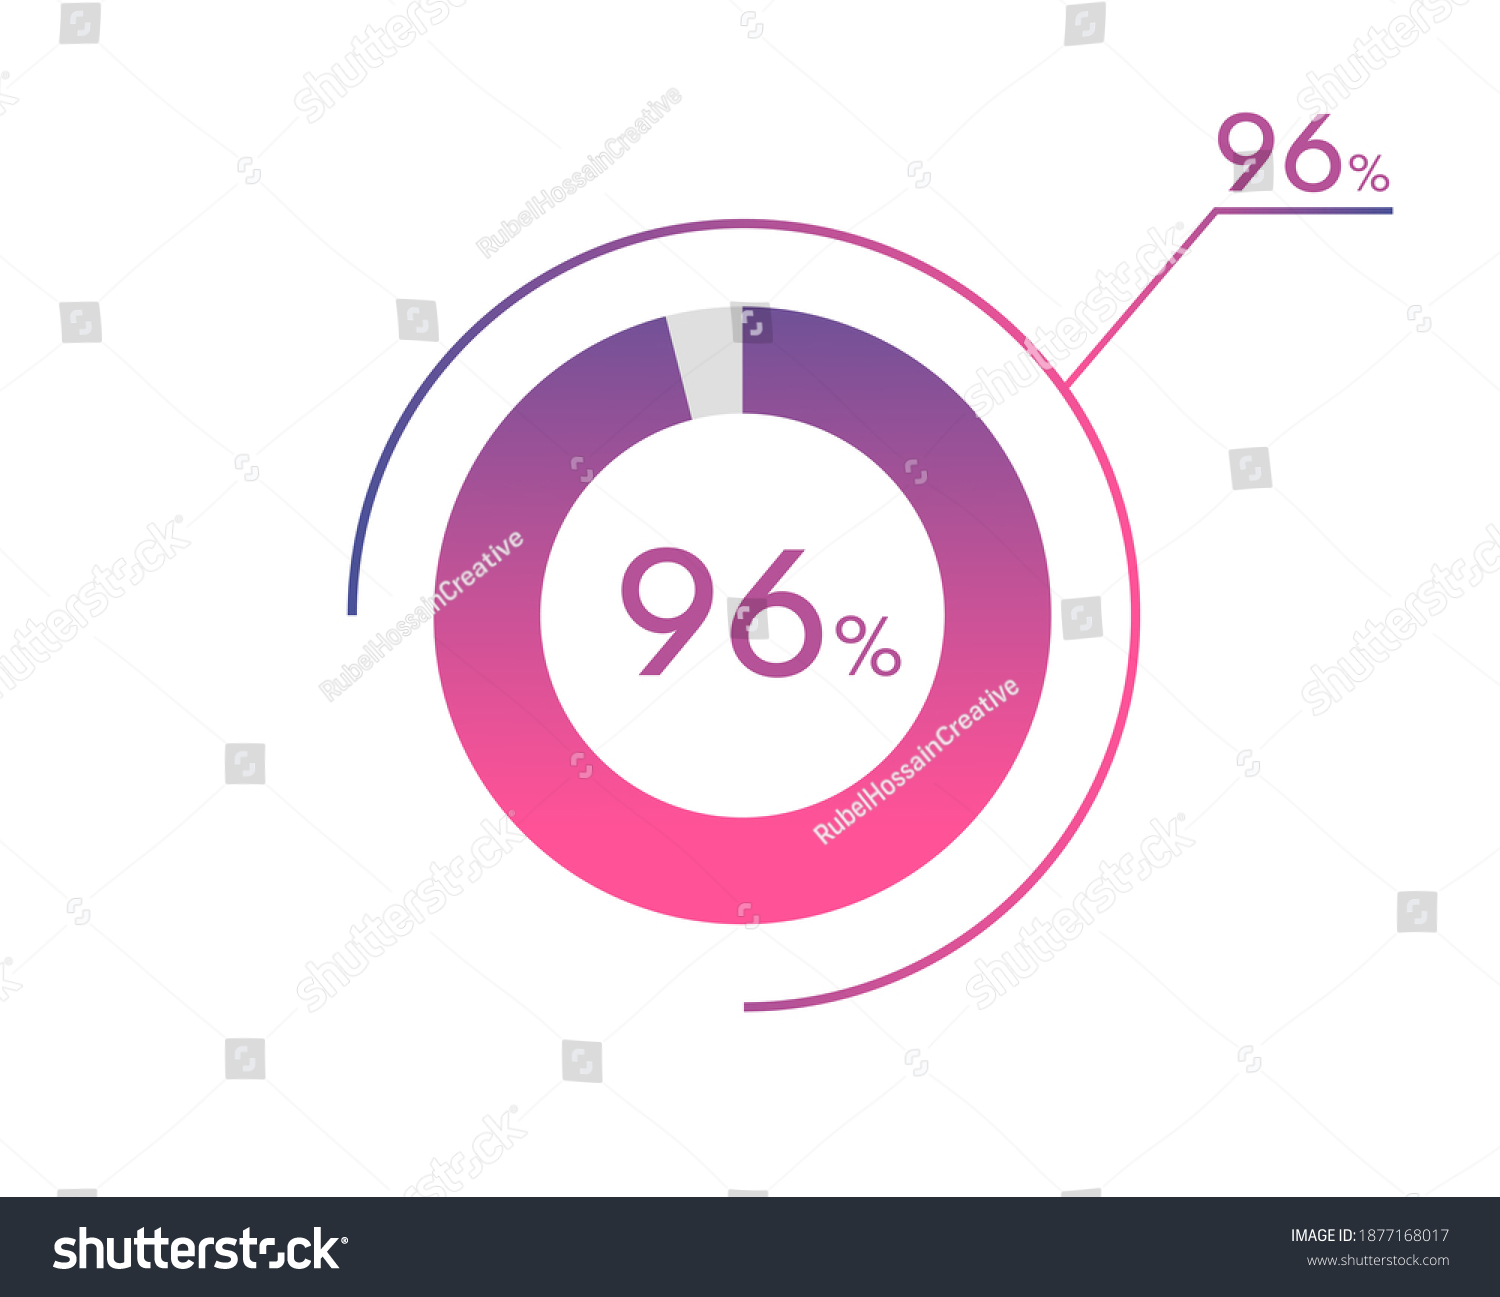 SVG of 96 Percentage diagrams, pie chart for Your documents, reports, 96% circle percentage diagrams for infographics svg